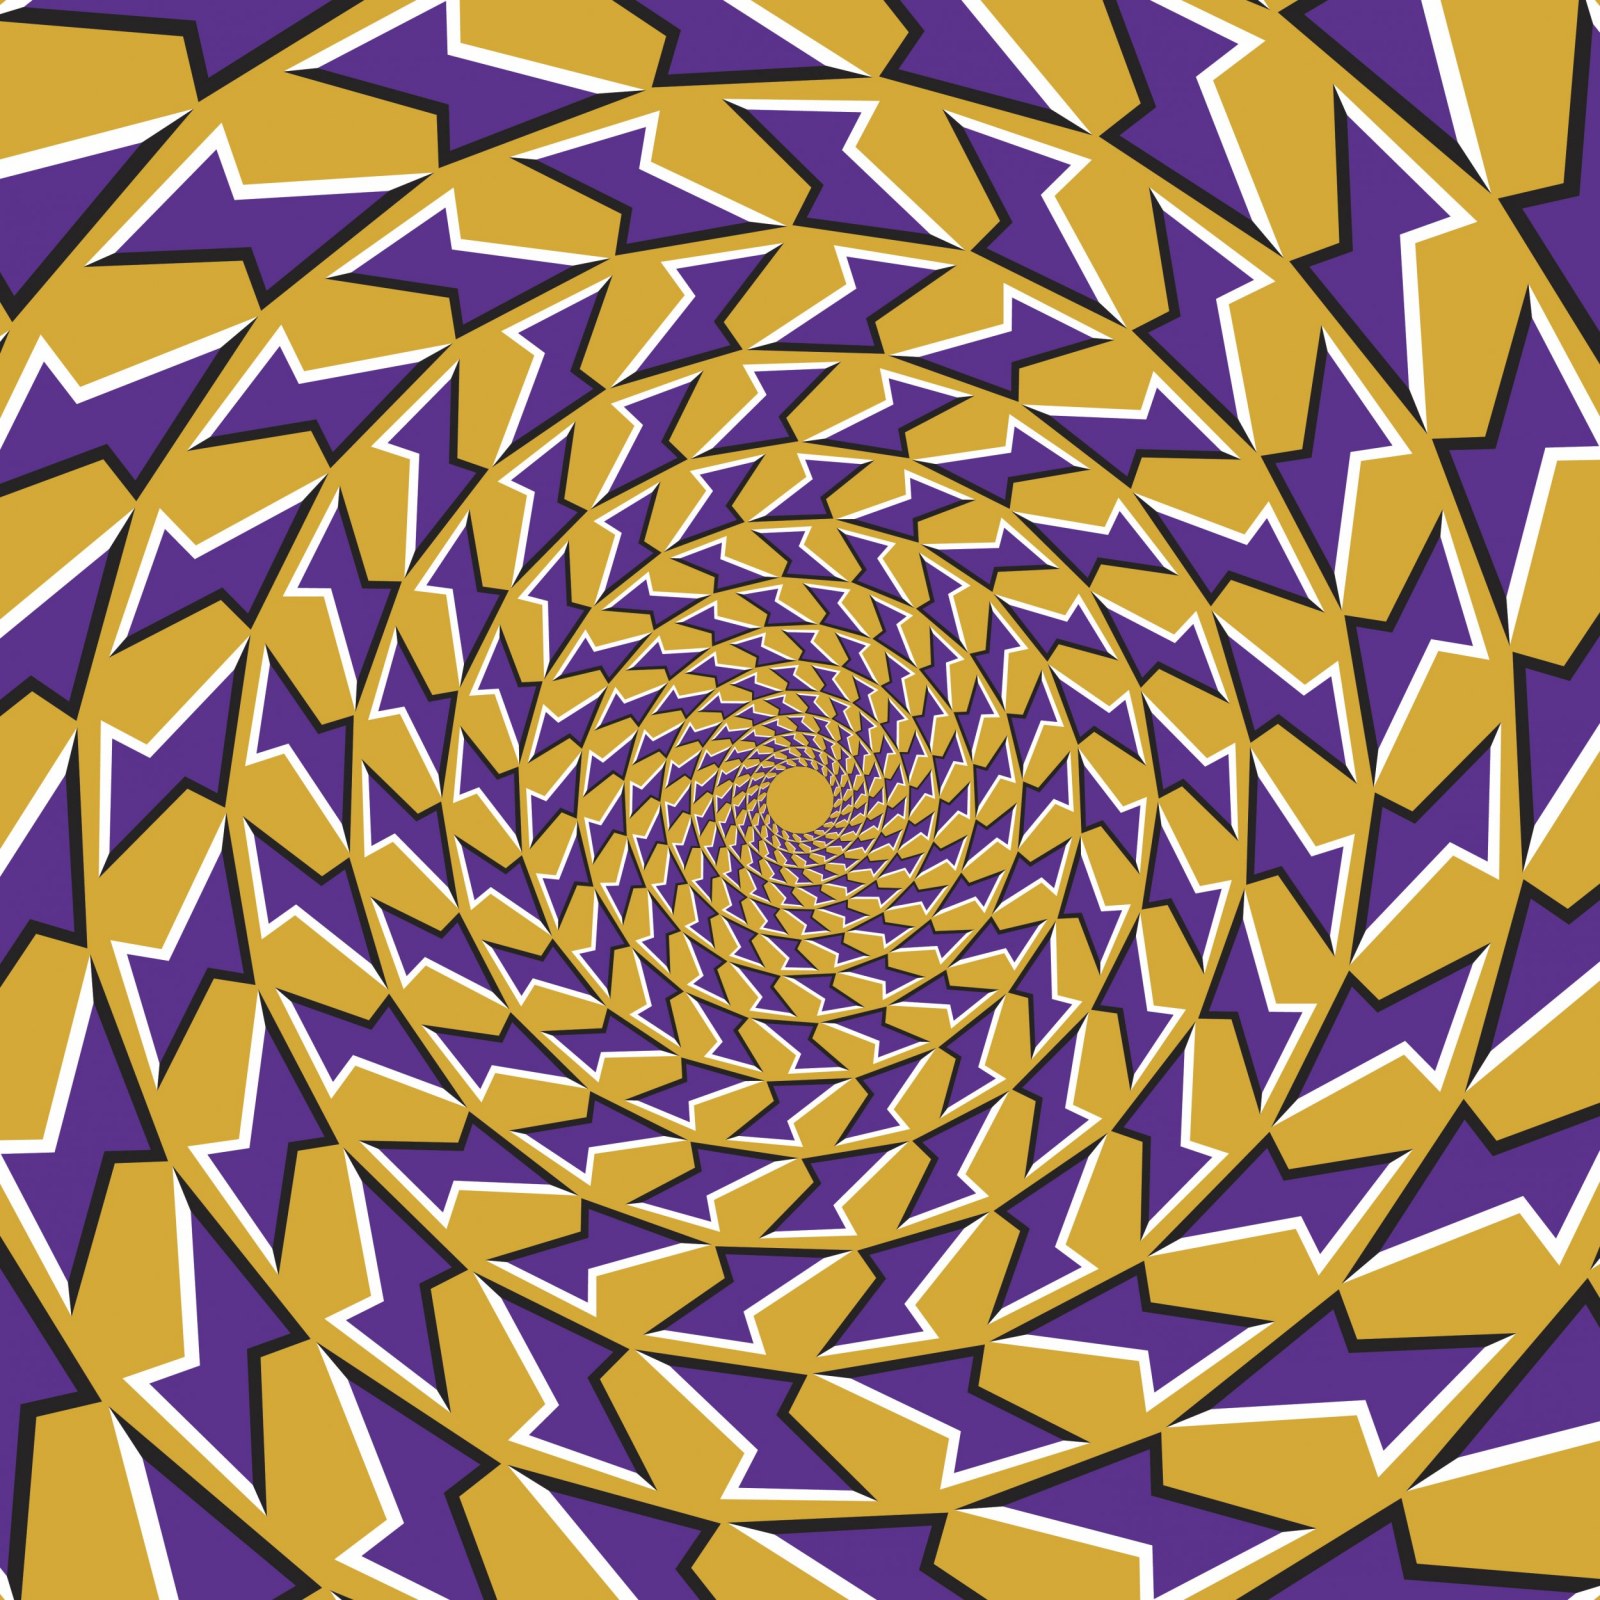 What Happens to Your Brain When You Look at an Optical Illusion?